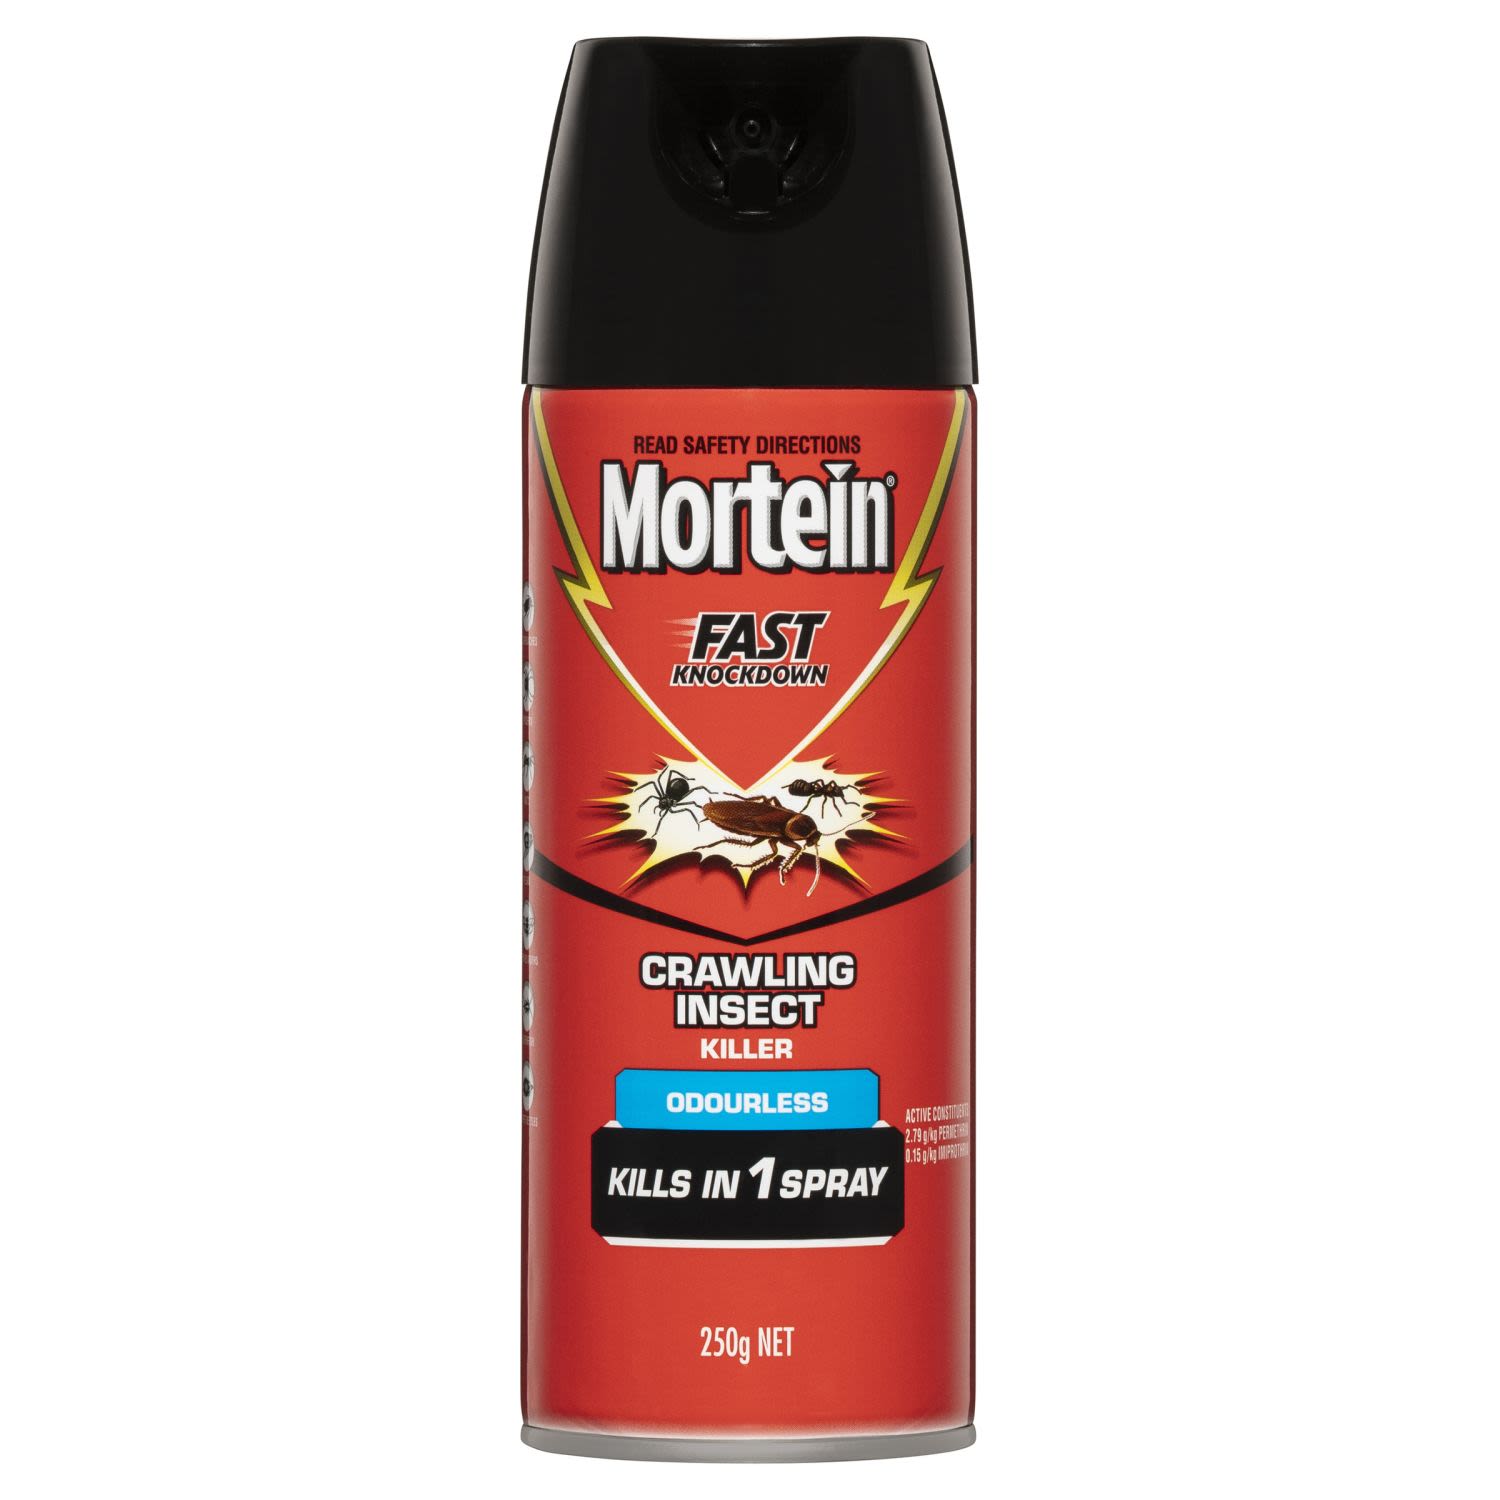 Mortein Fast Knockdown Odourless Surface Spray Crawling Insect Killer, 250 Gram